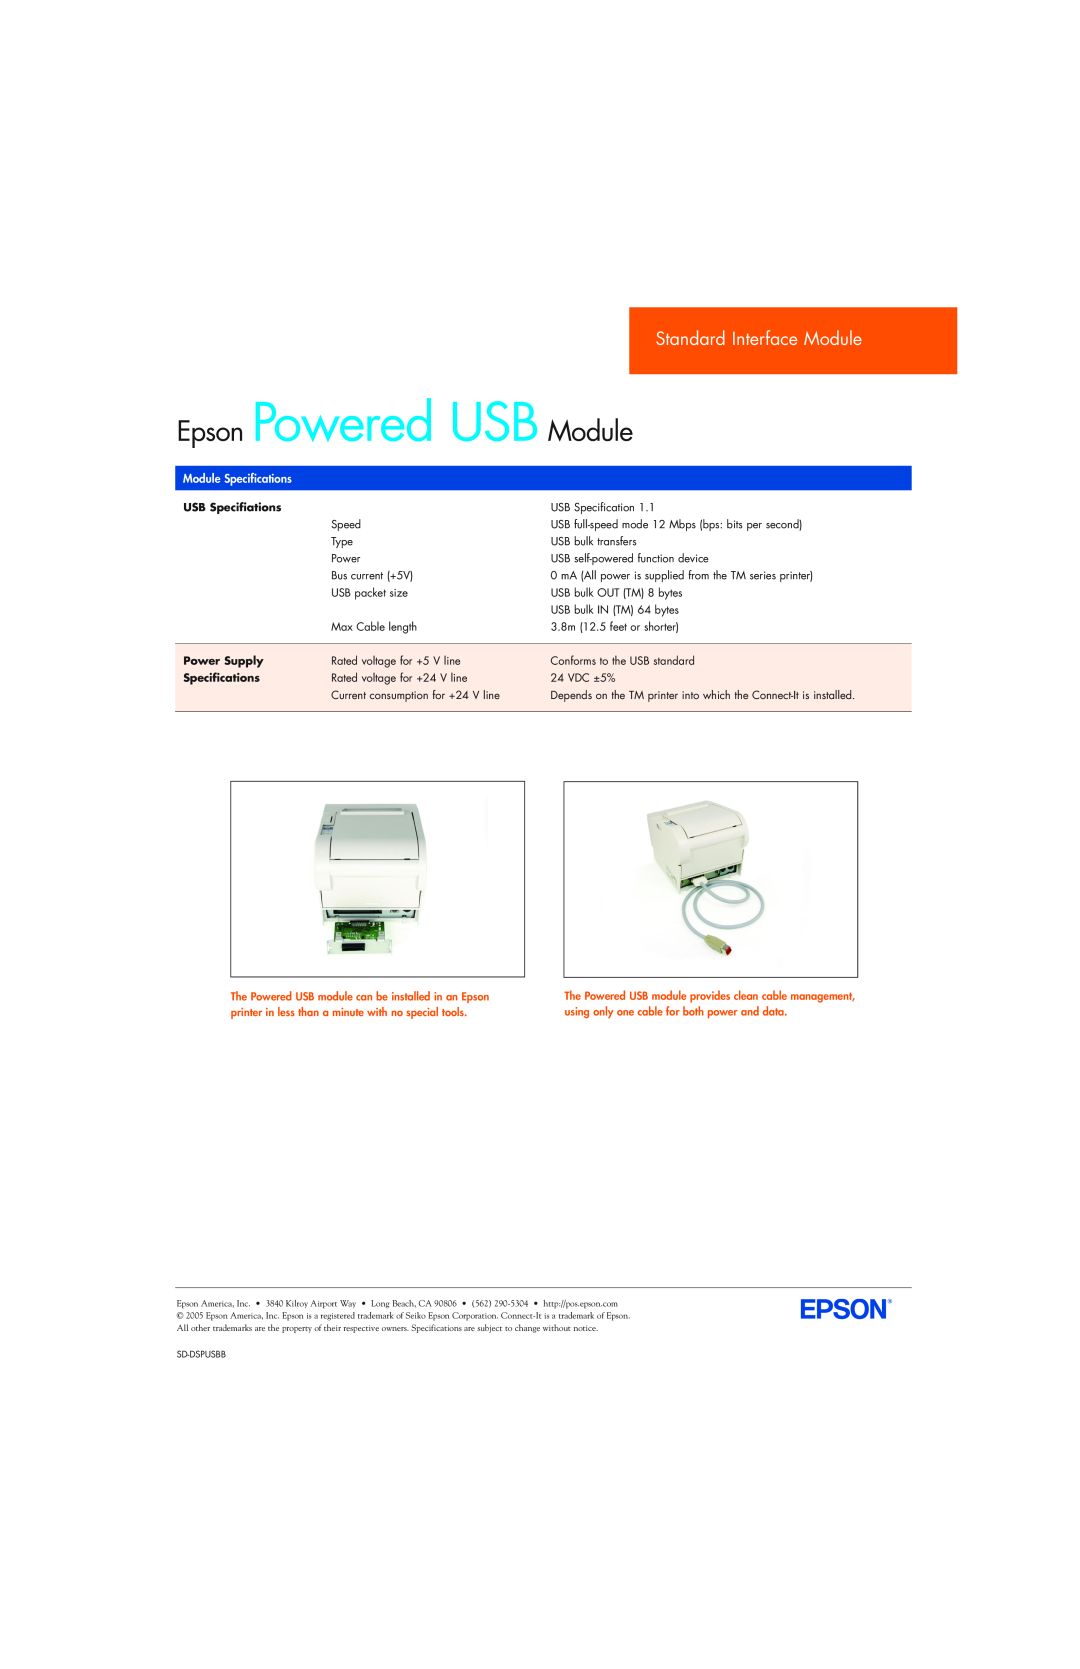 Epson SD-DSPUSBB manual Epson Powered USB Module, Standard Interface Module, Module Specifications, USB Specifiations 